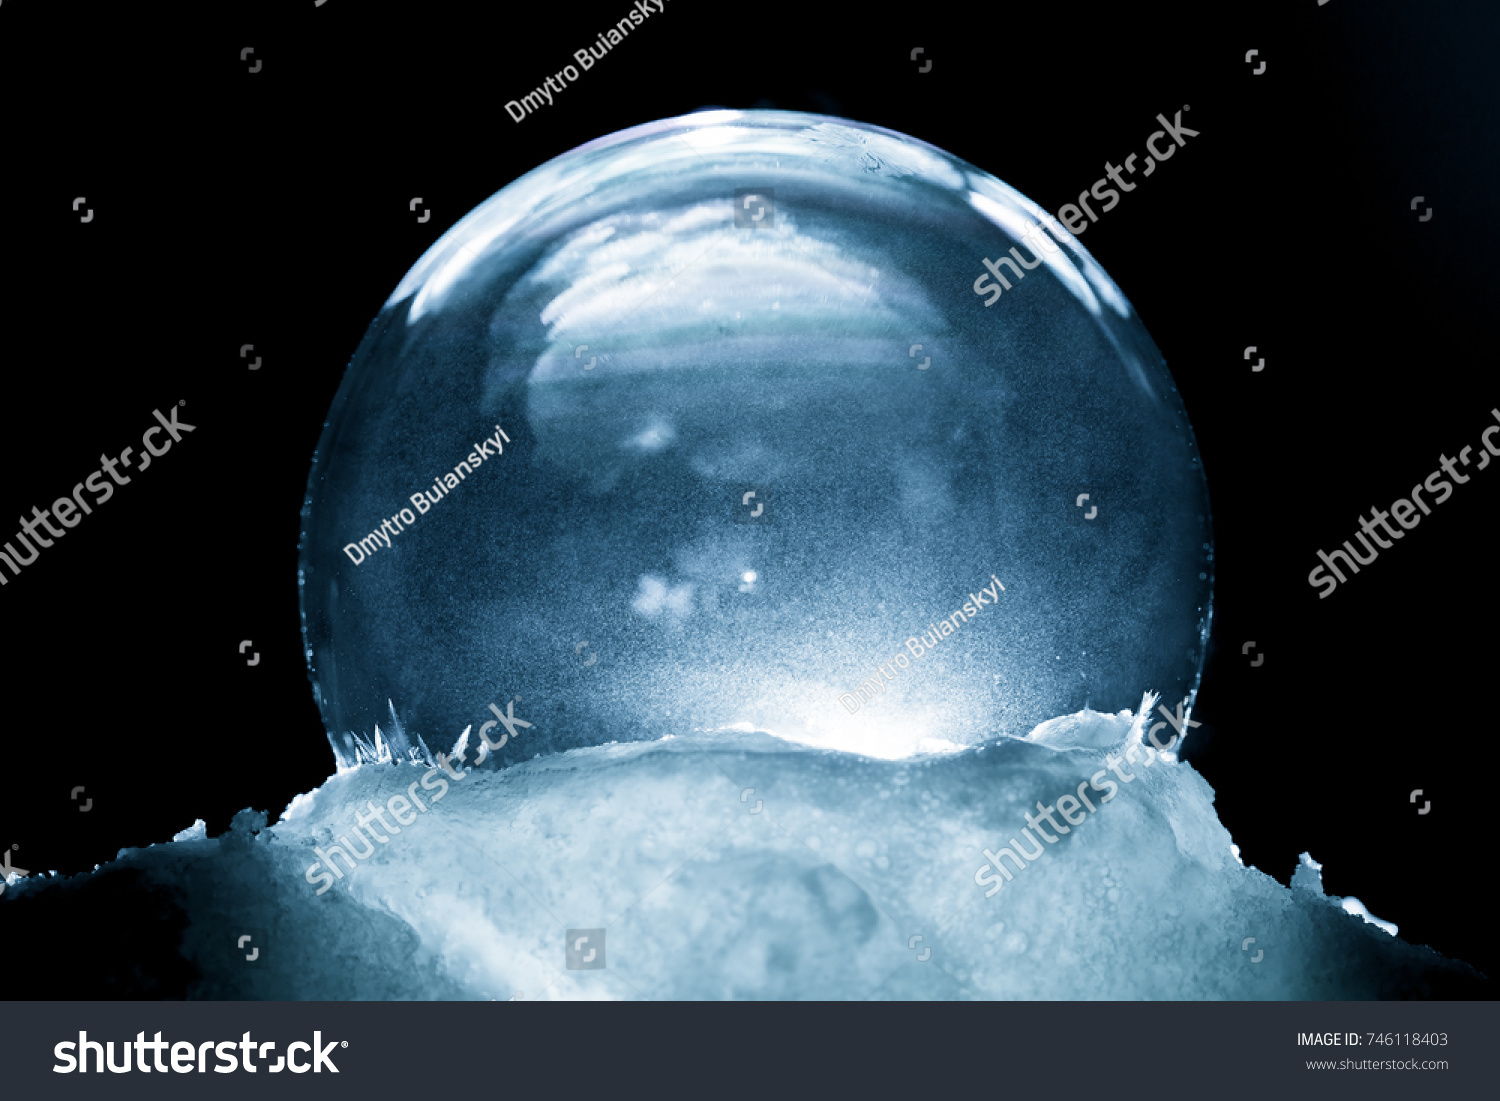 Frozen snow globe christmas magic ball with flying snowflakes. Winter Background. Christmas and New Year Holidays precious backdrop. Ice patterns frosted on ball of soap against dark black abstract #746118403